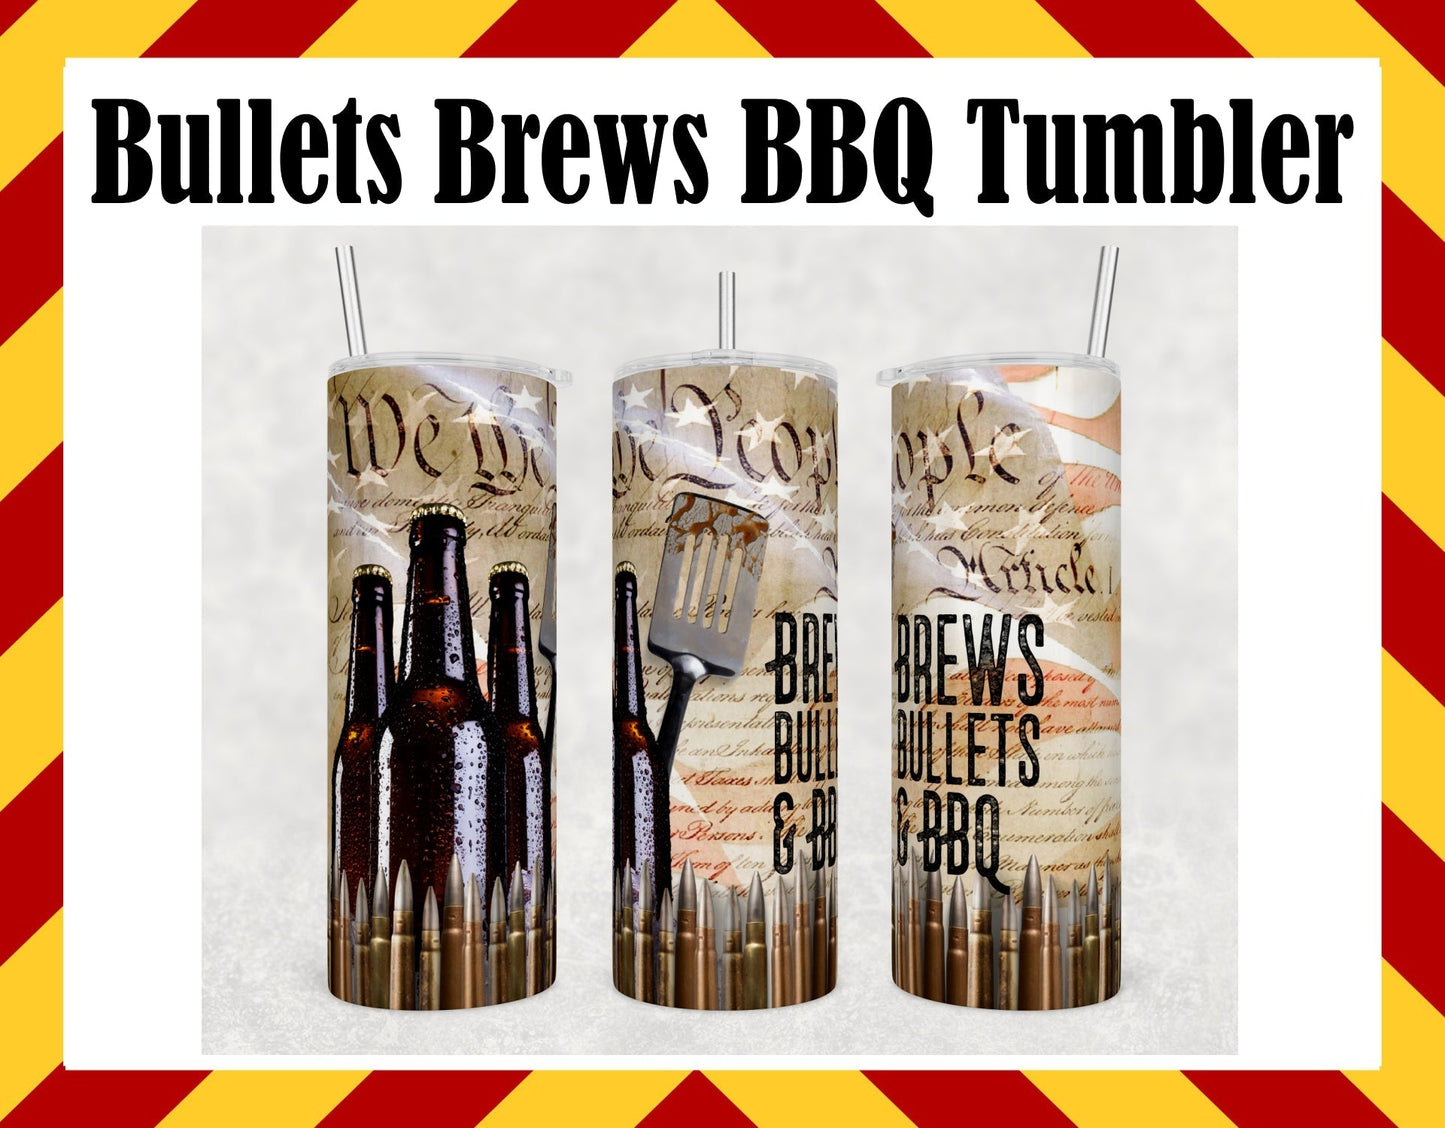 Stainless Steel Cup - Bullets Beer BBQ Design Hot/Cold Cup